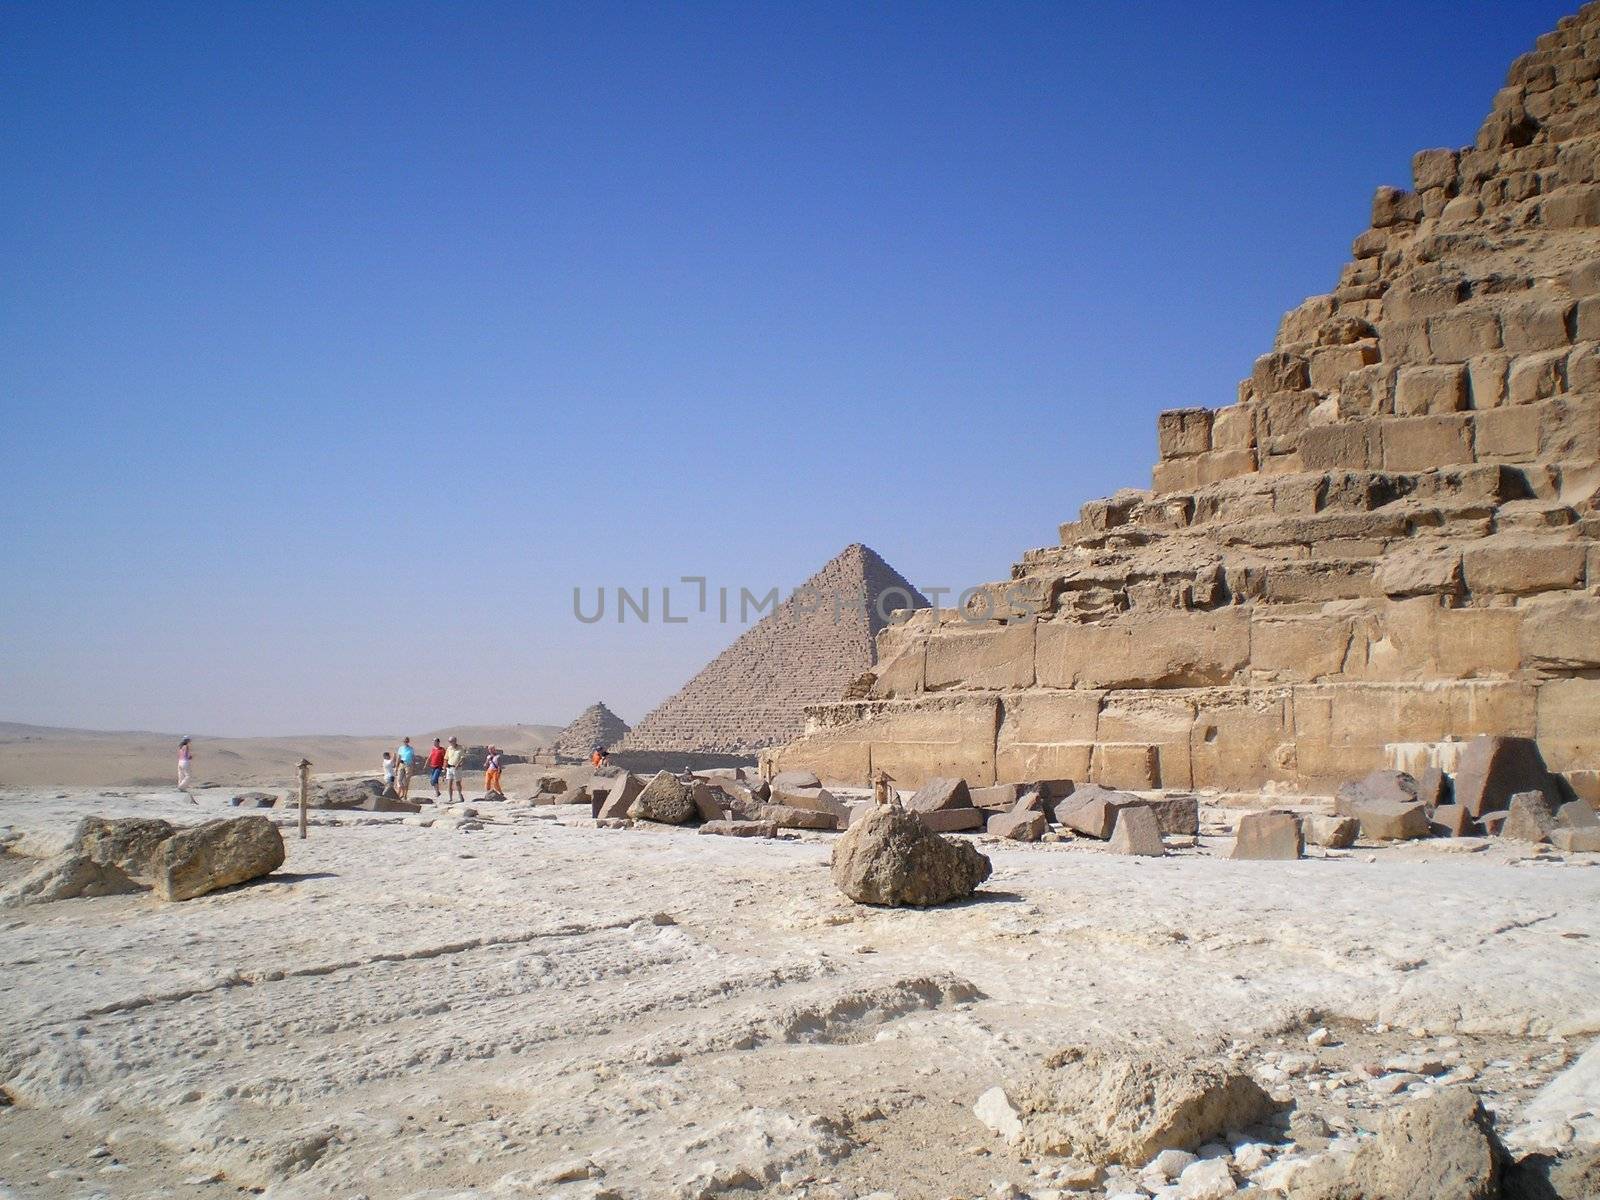 pyramids in the plan of giza